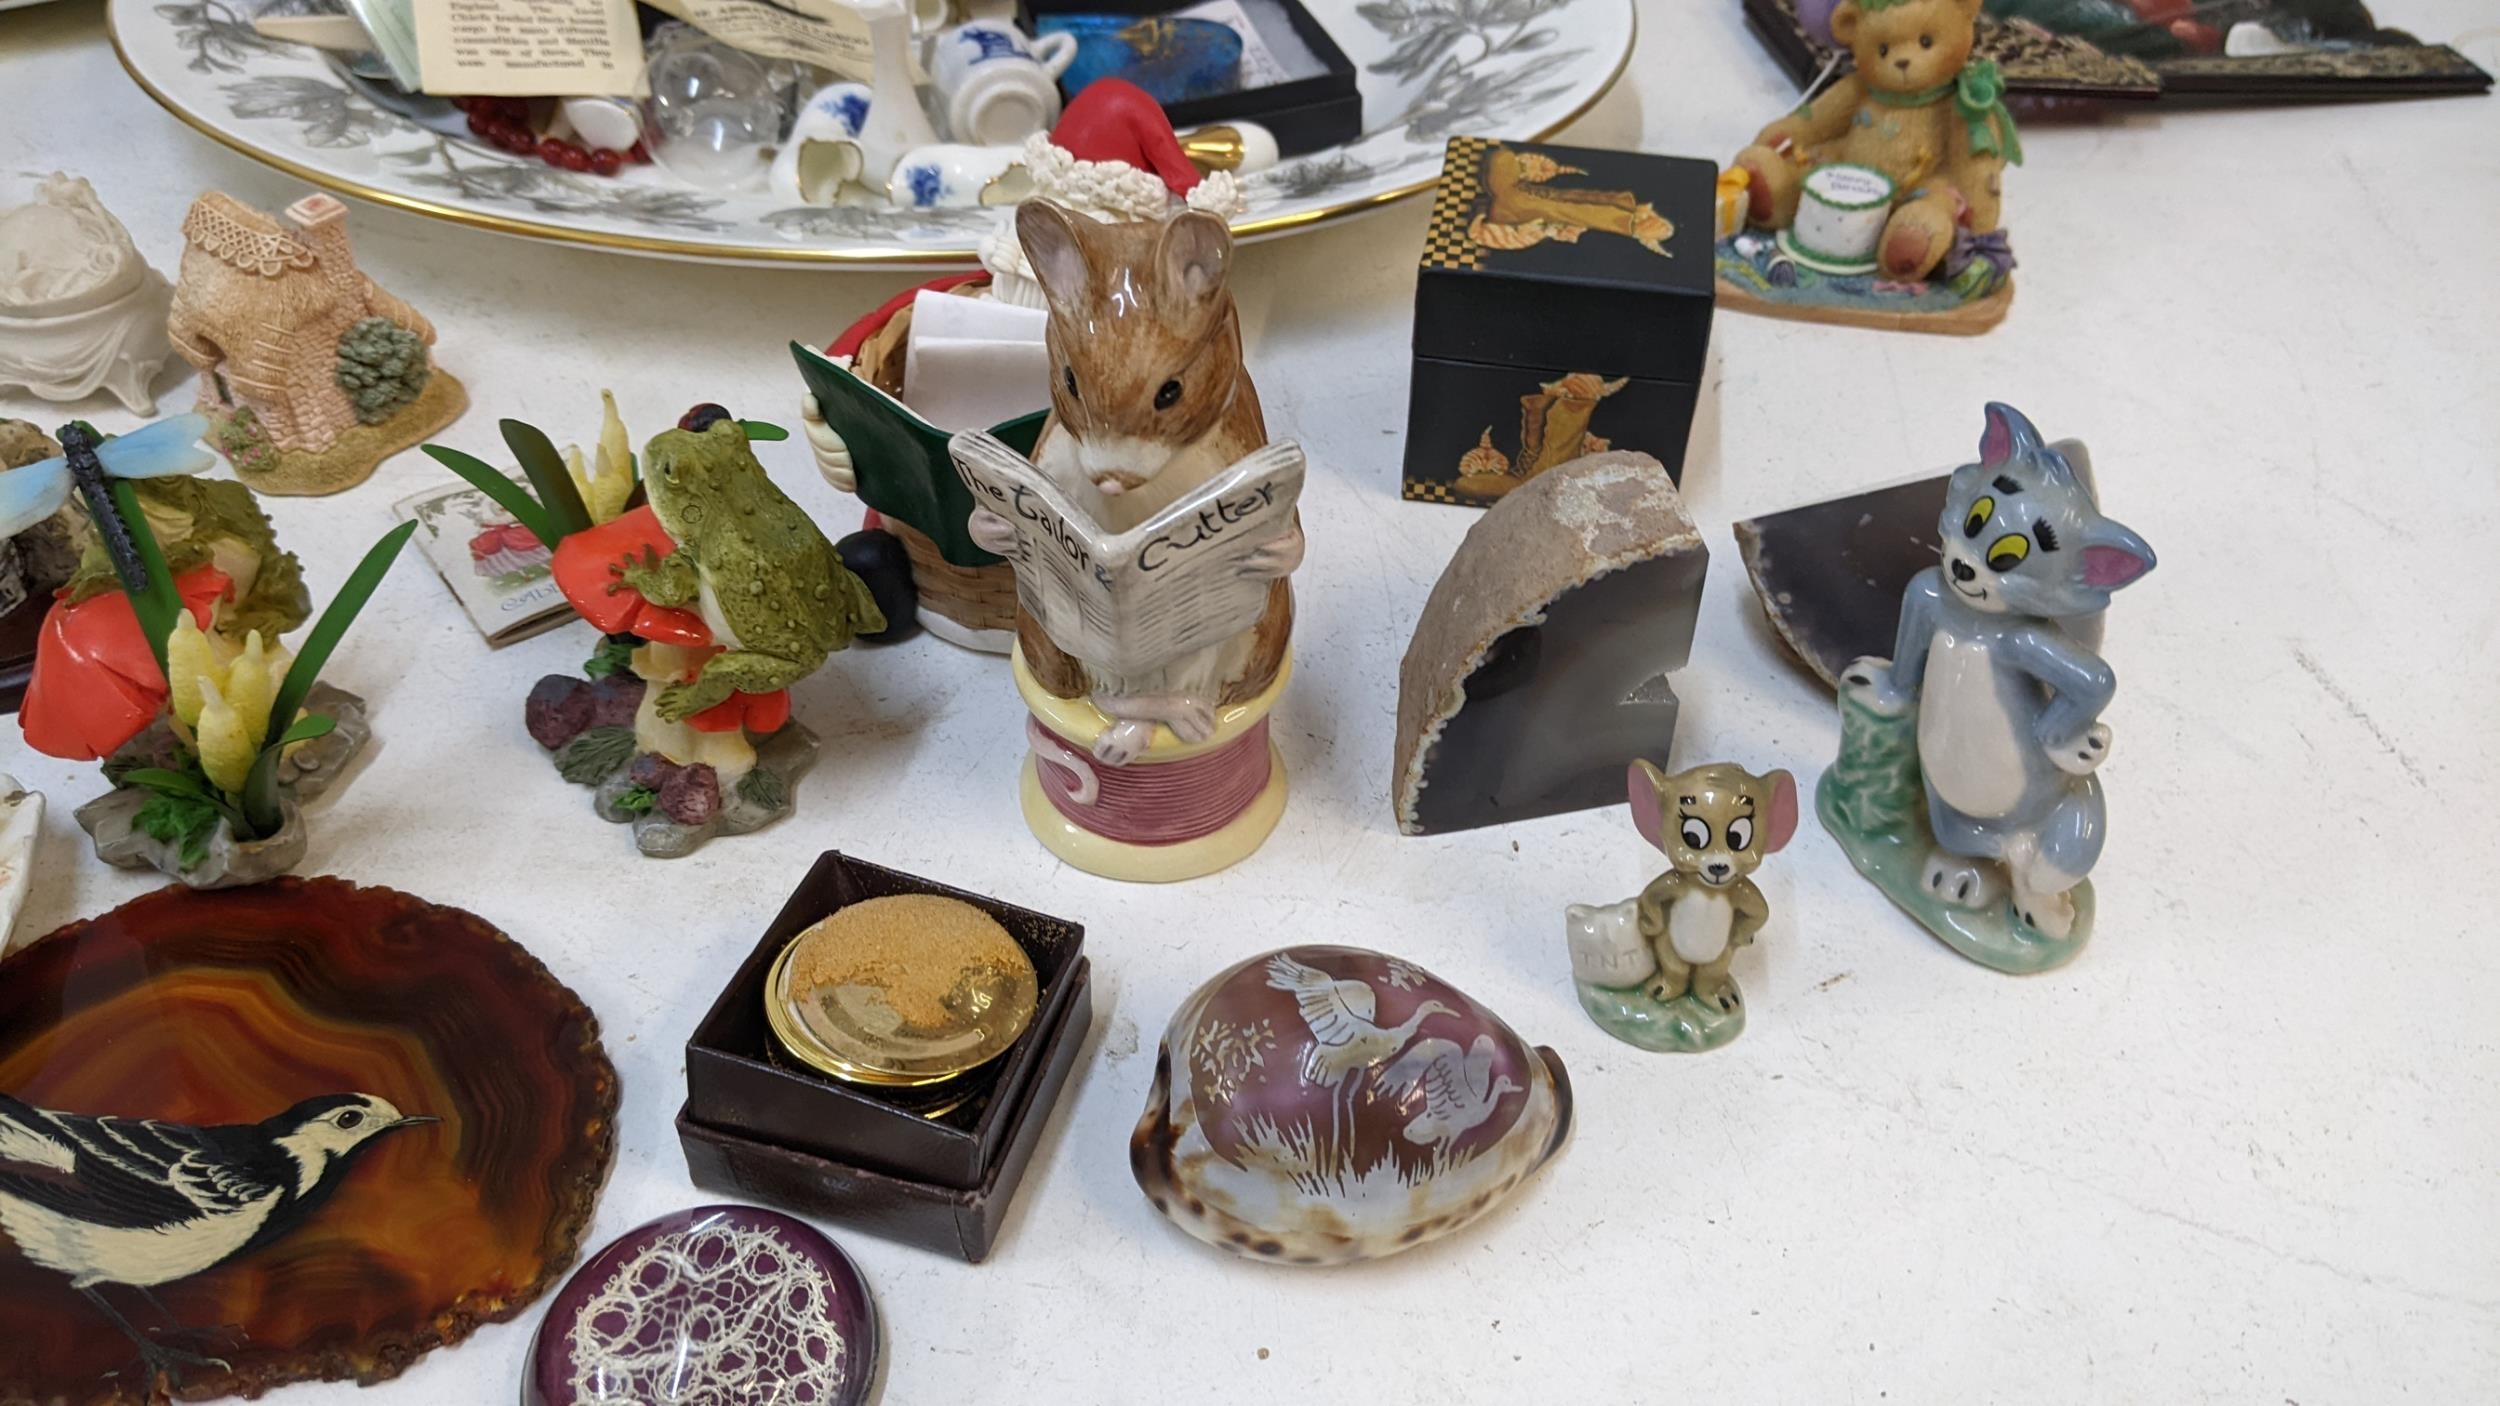 Ceramics and glass to include Victorian meat plates, decorative plates bowls, Wade Tom and Jerry, - Image 2 of 2